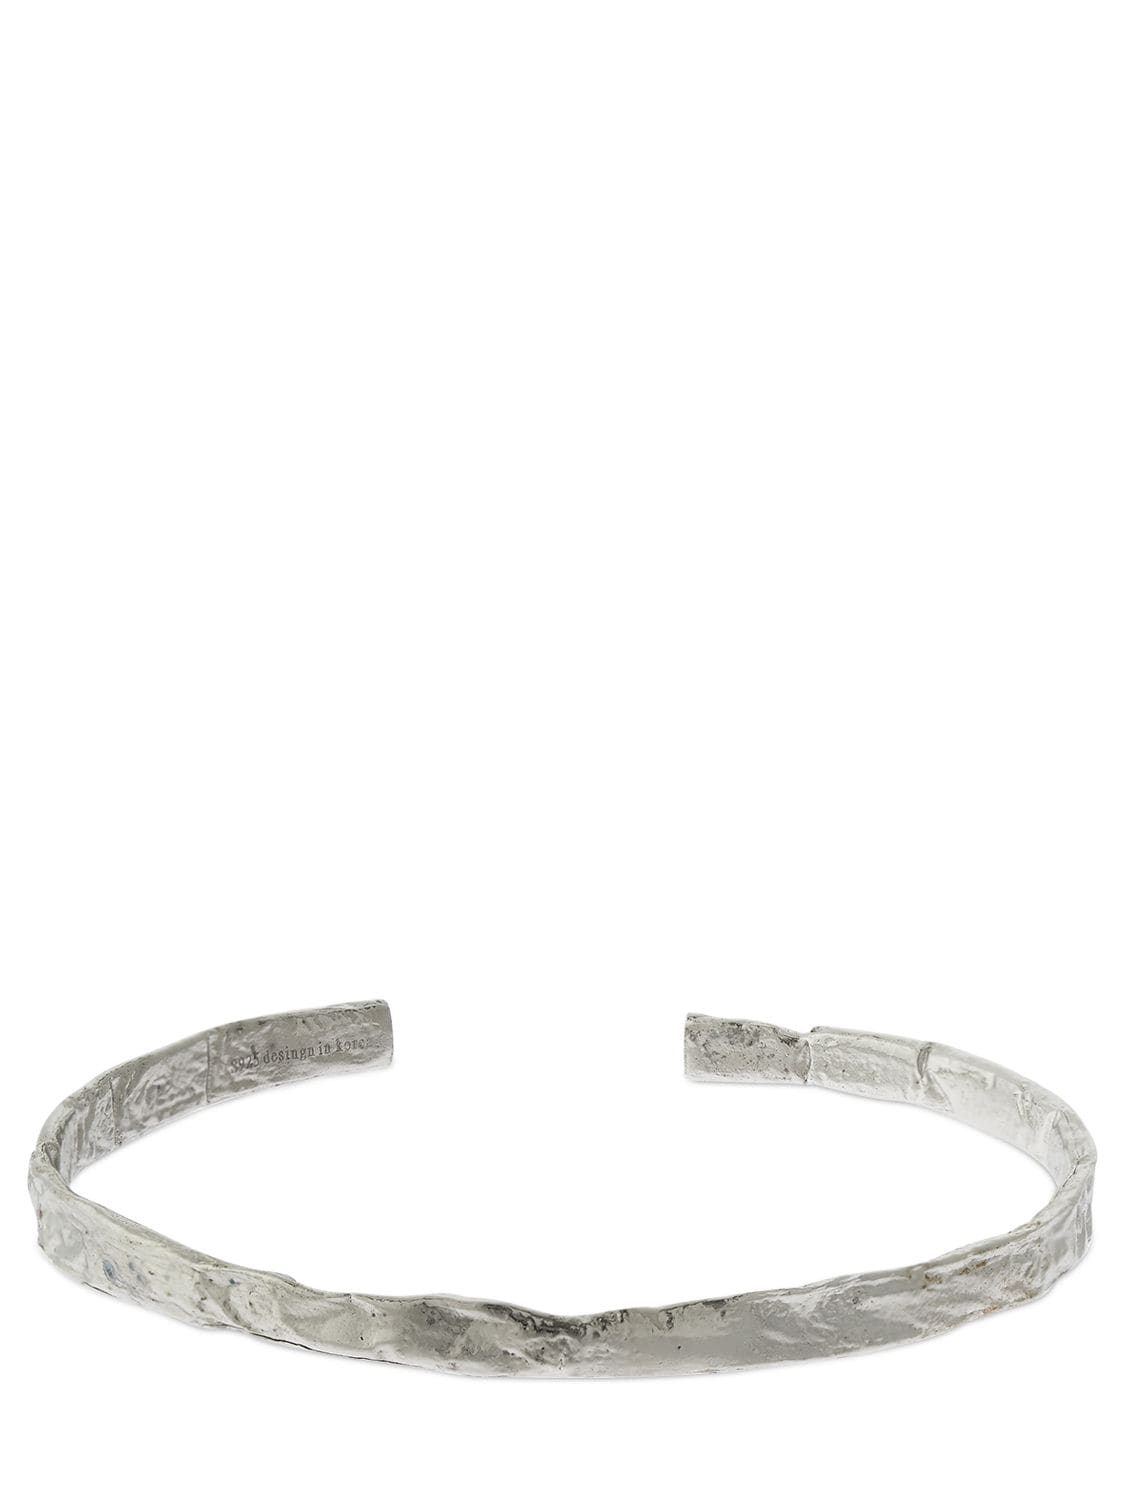 Other Crushed Band Silver Cuff Bracelet